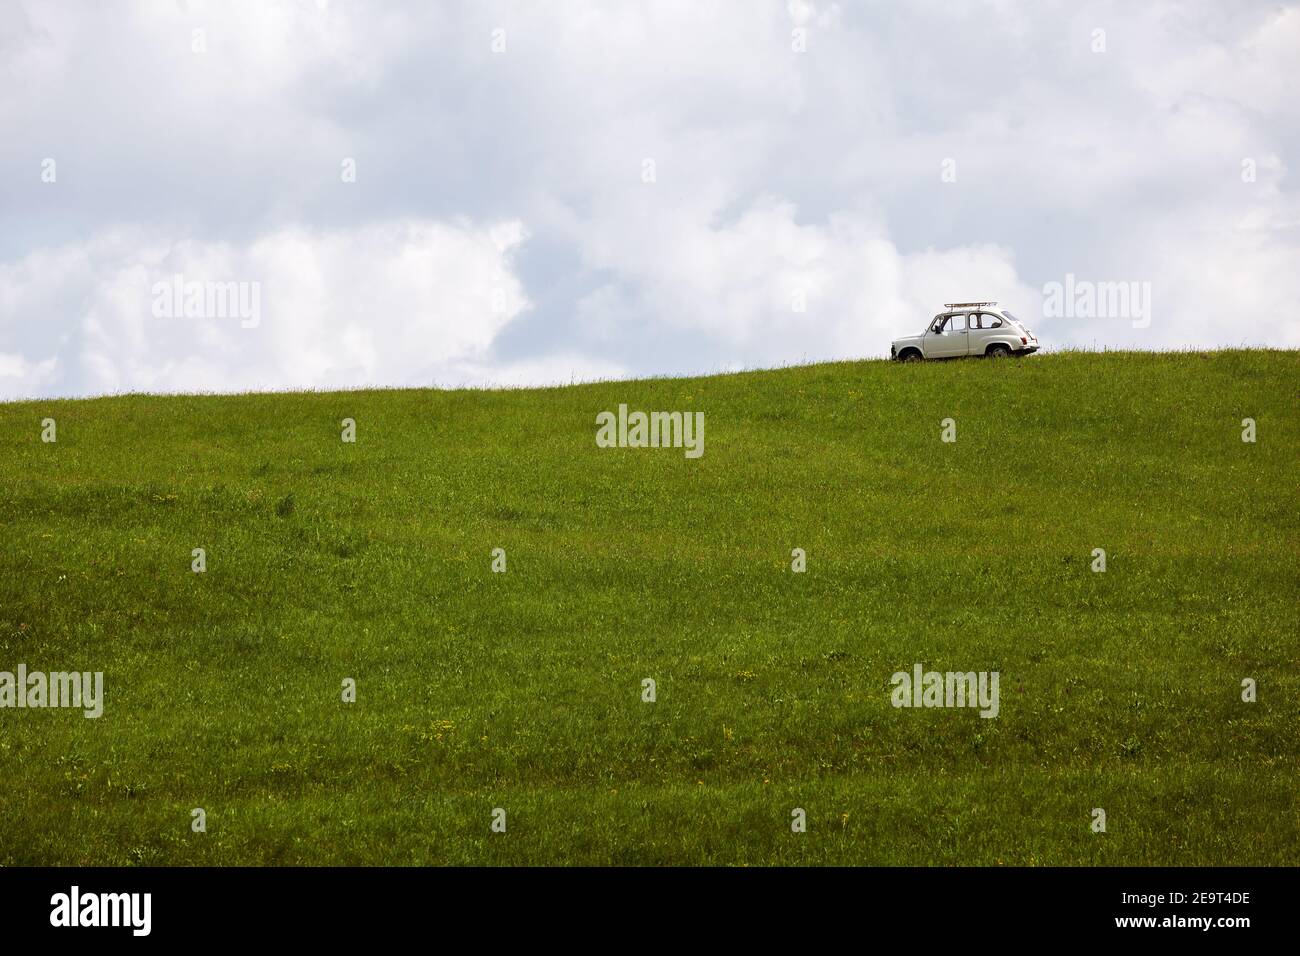 An old white car in the middle of a green unmown meadow with a cloudy sky in the background. Stock Photo